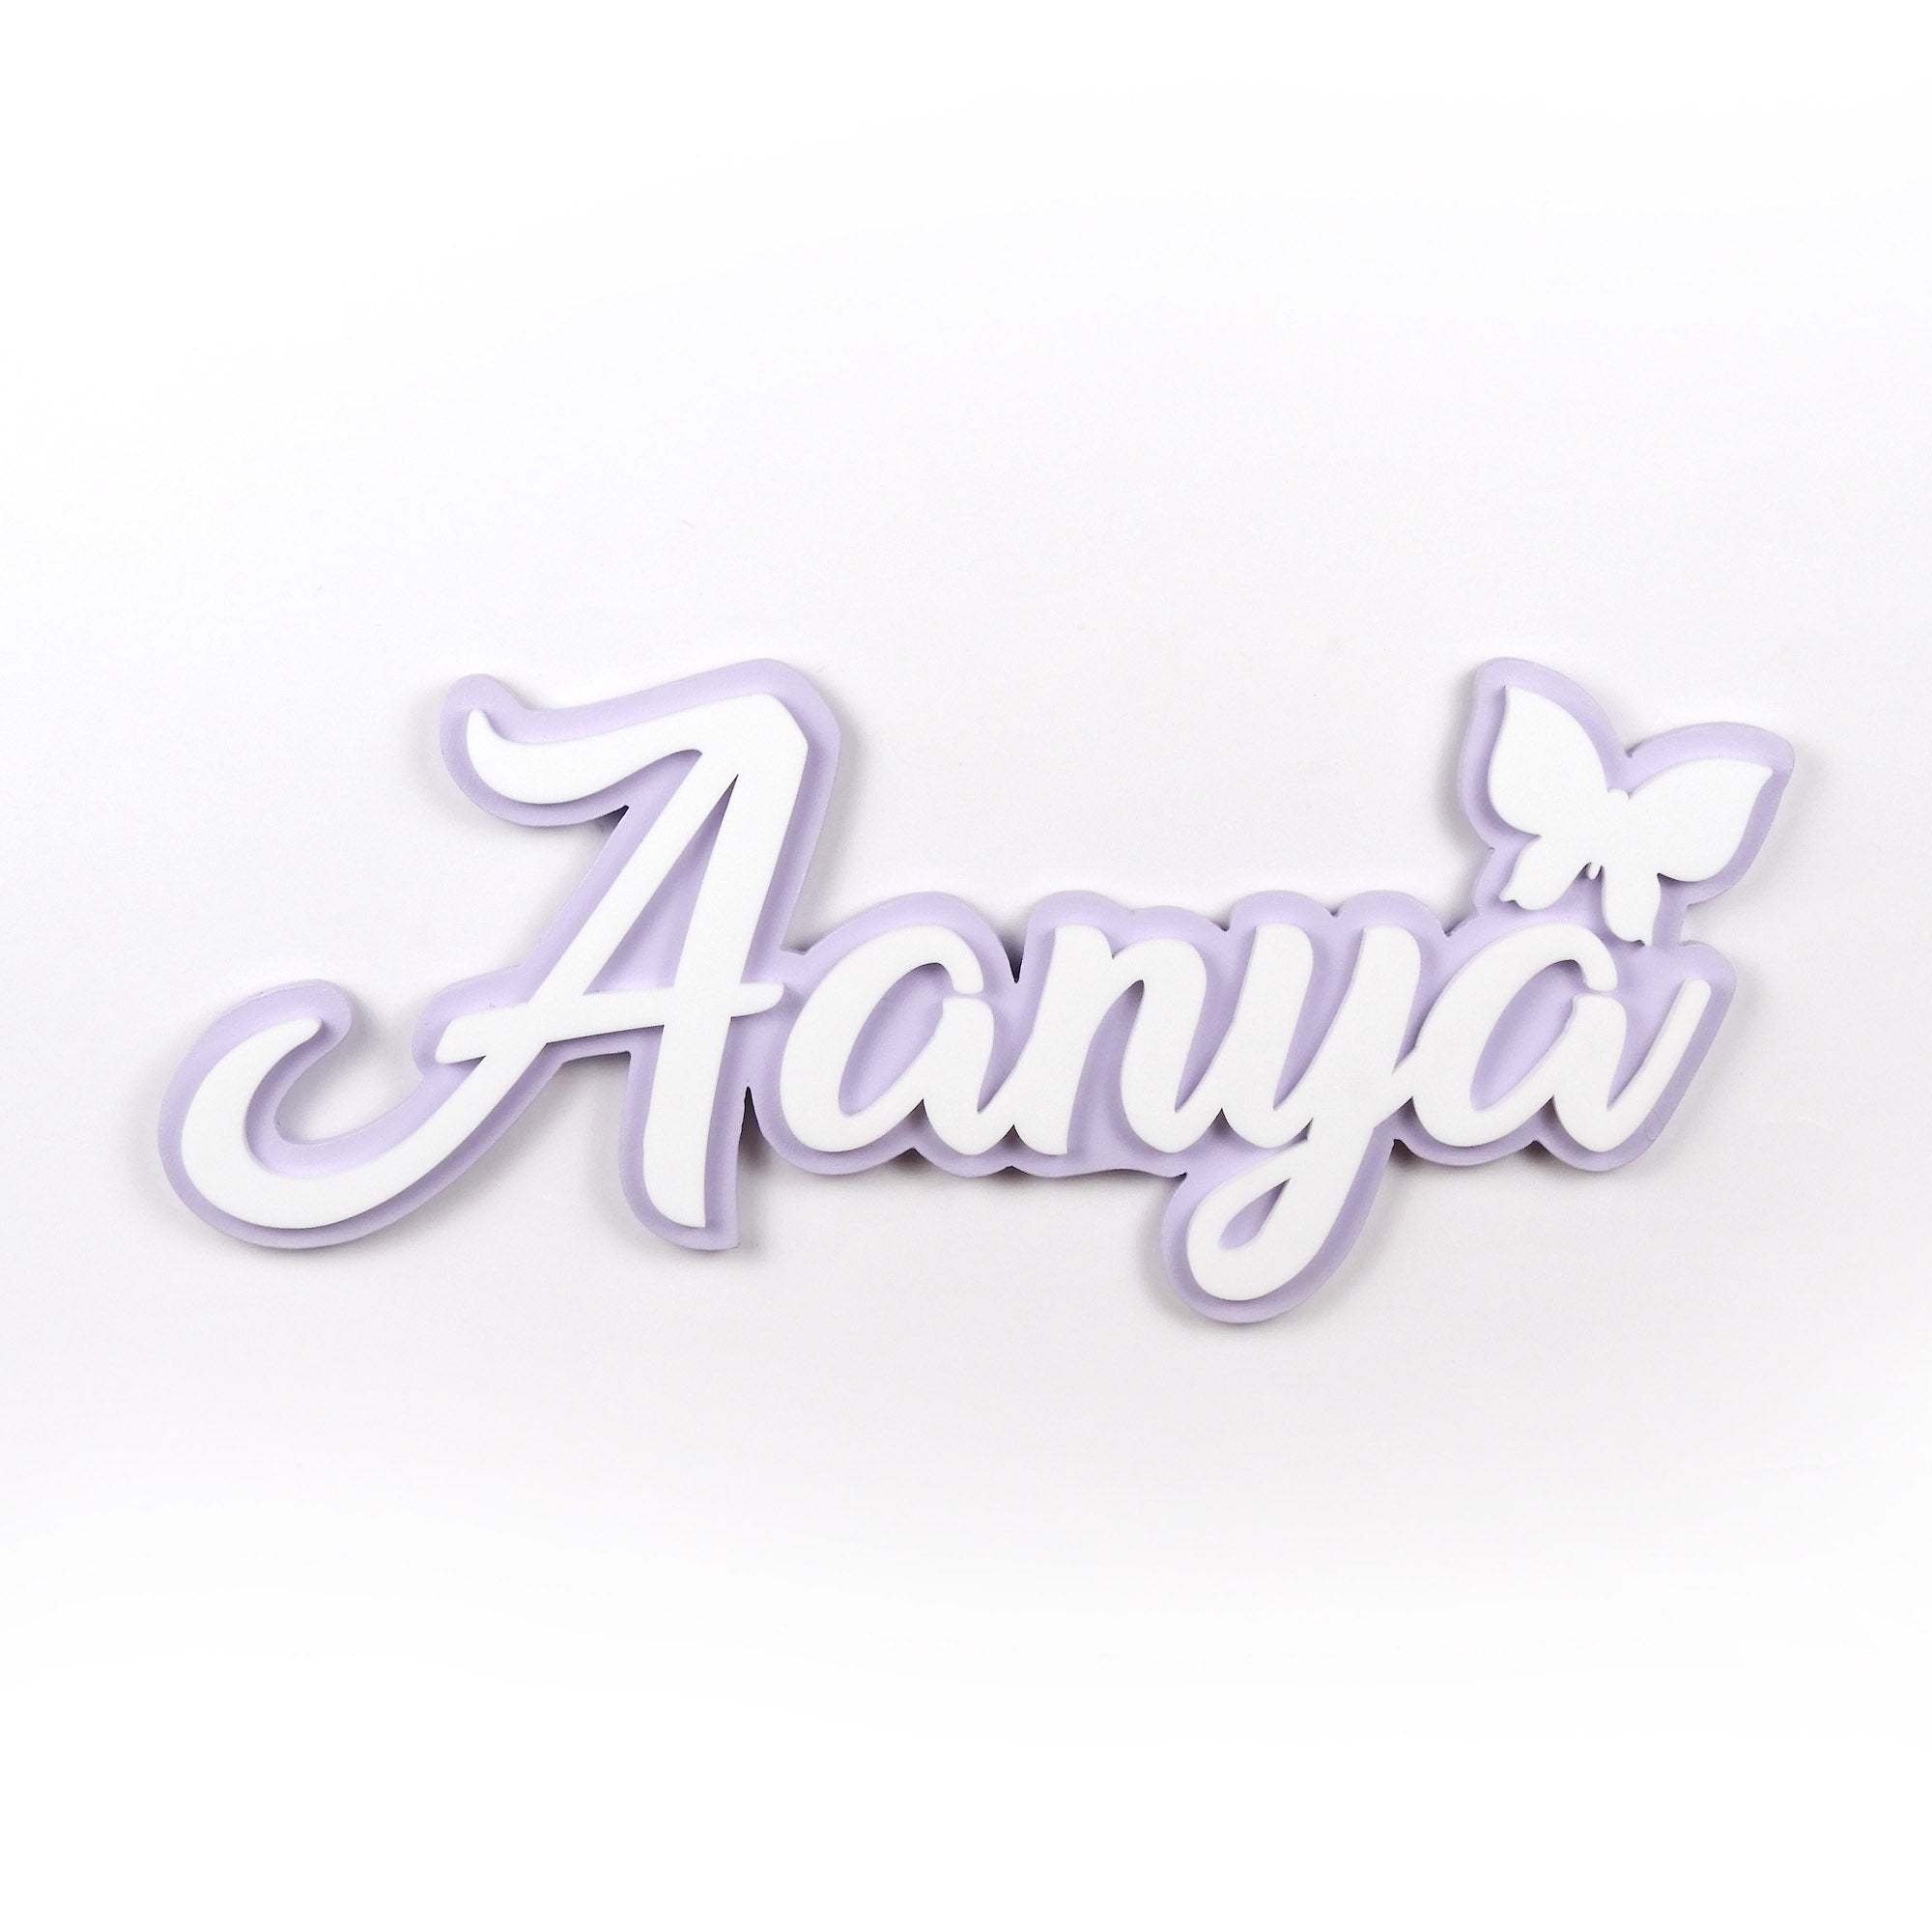 3D Acrylic Name Plaque - Butterfly